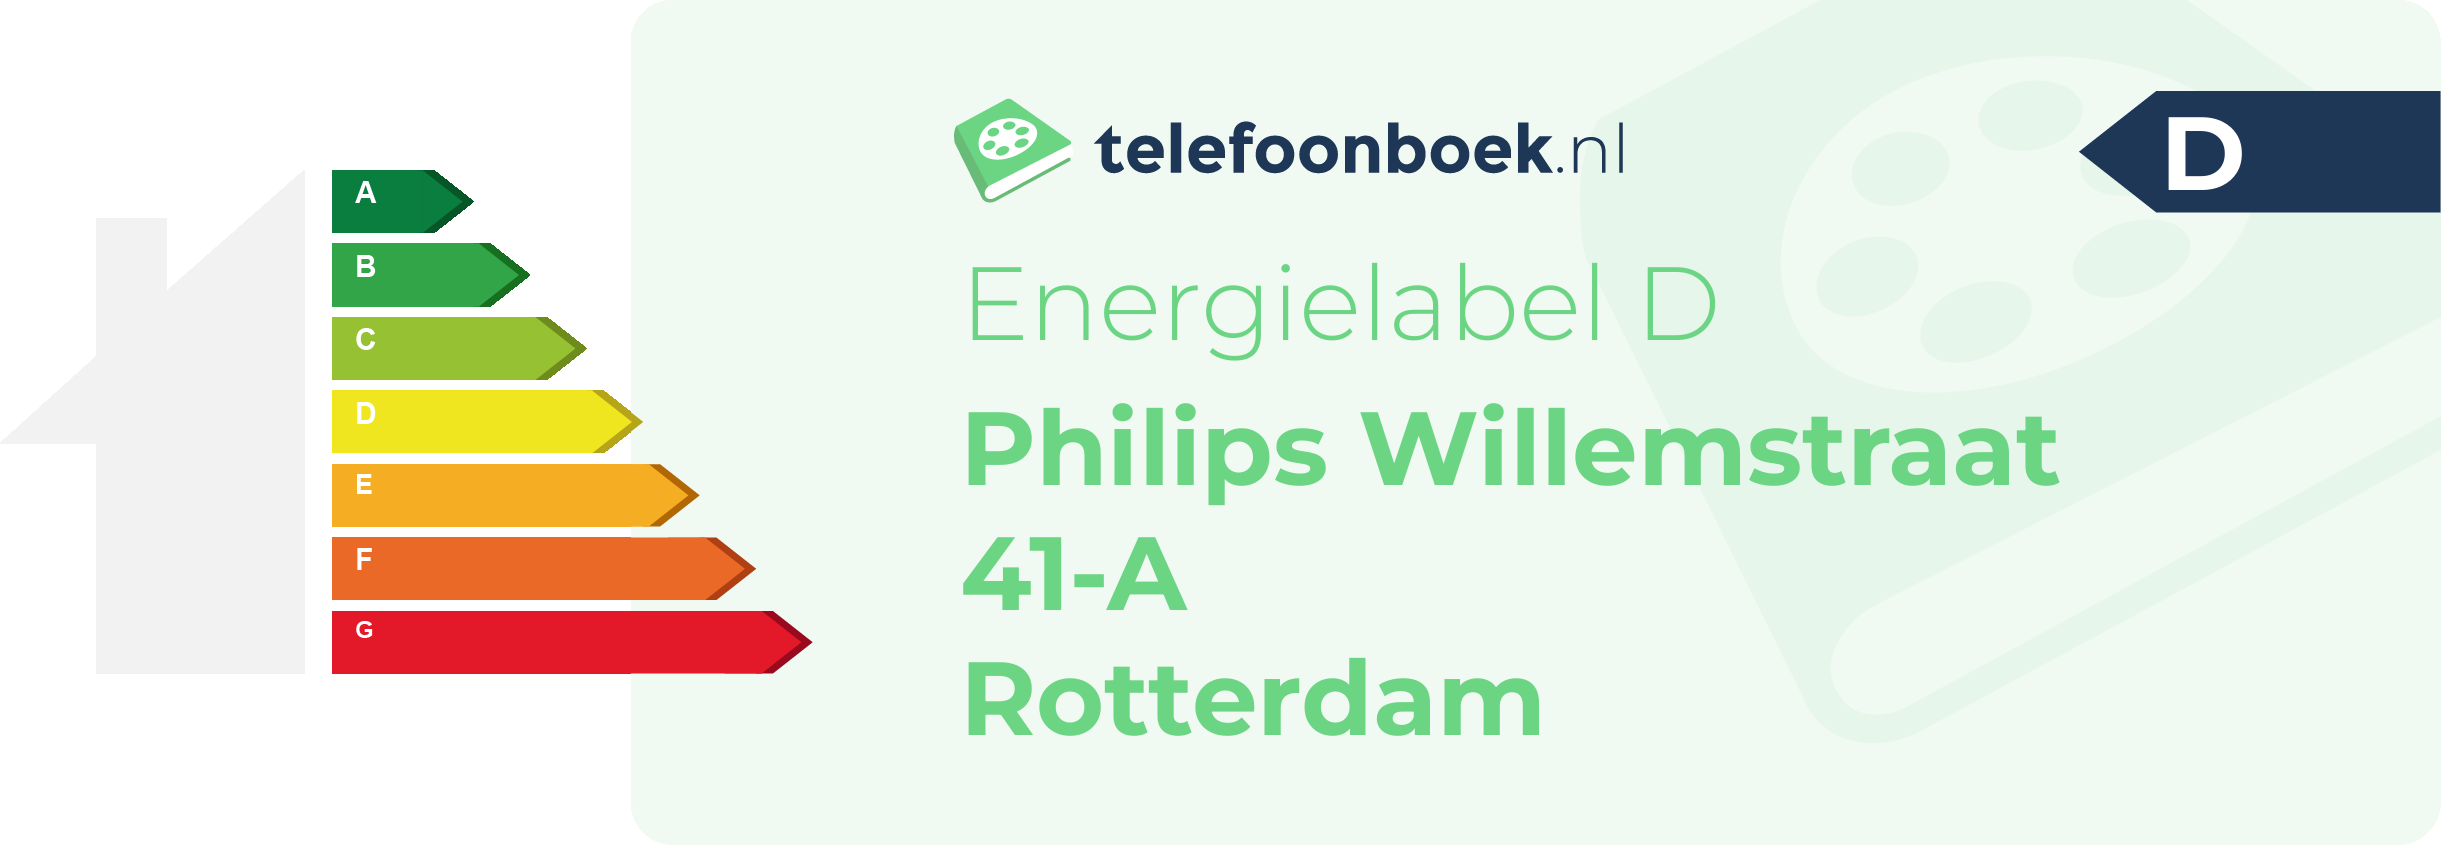 Energielabel Philips Willemstraat 41-A Rotterdam